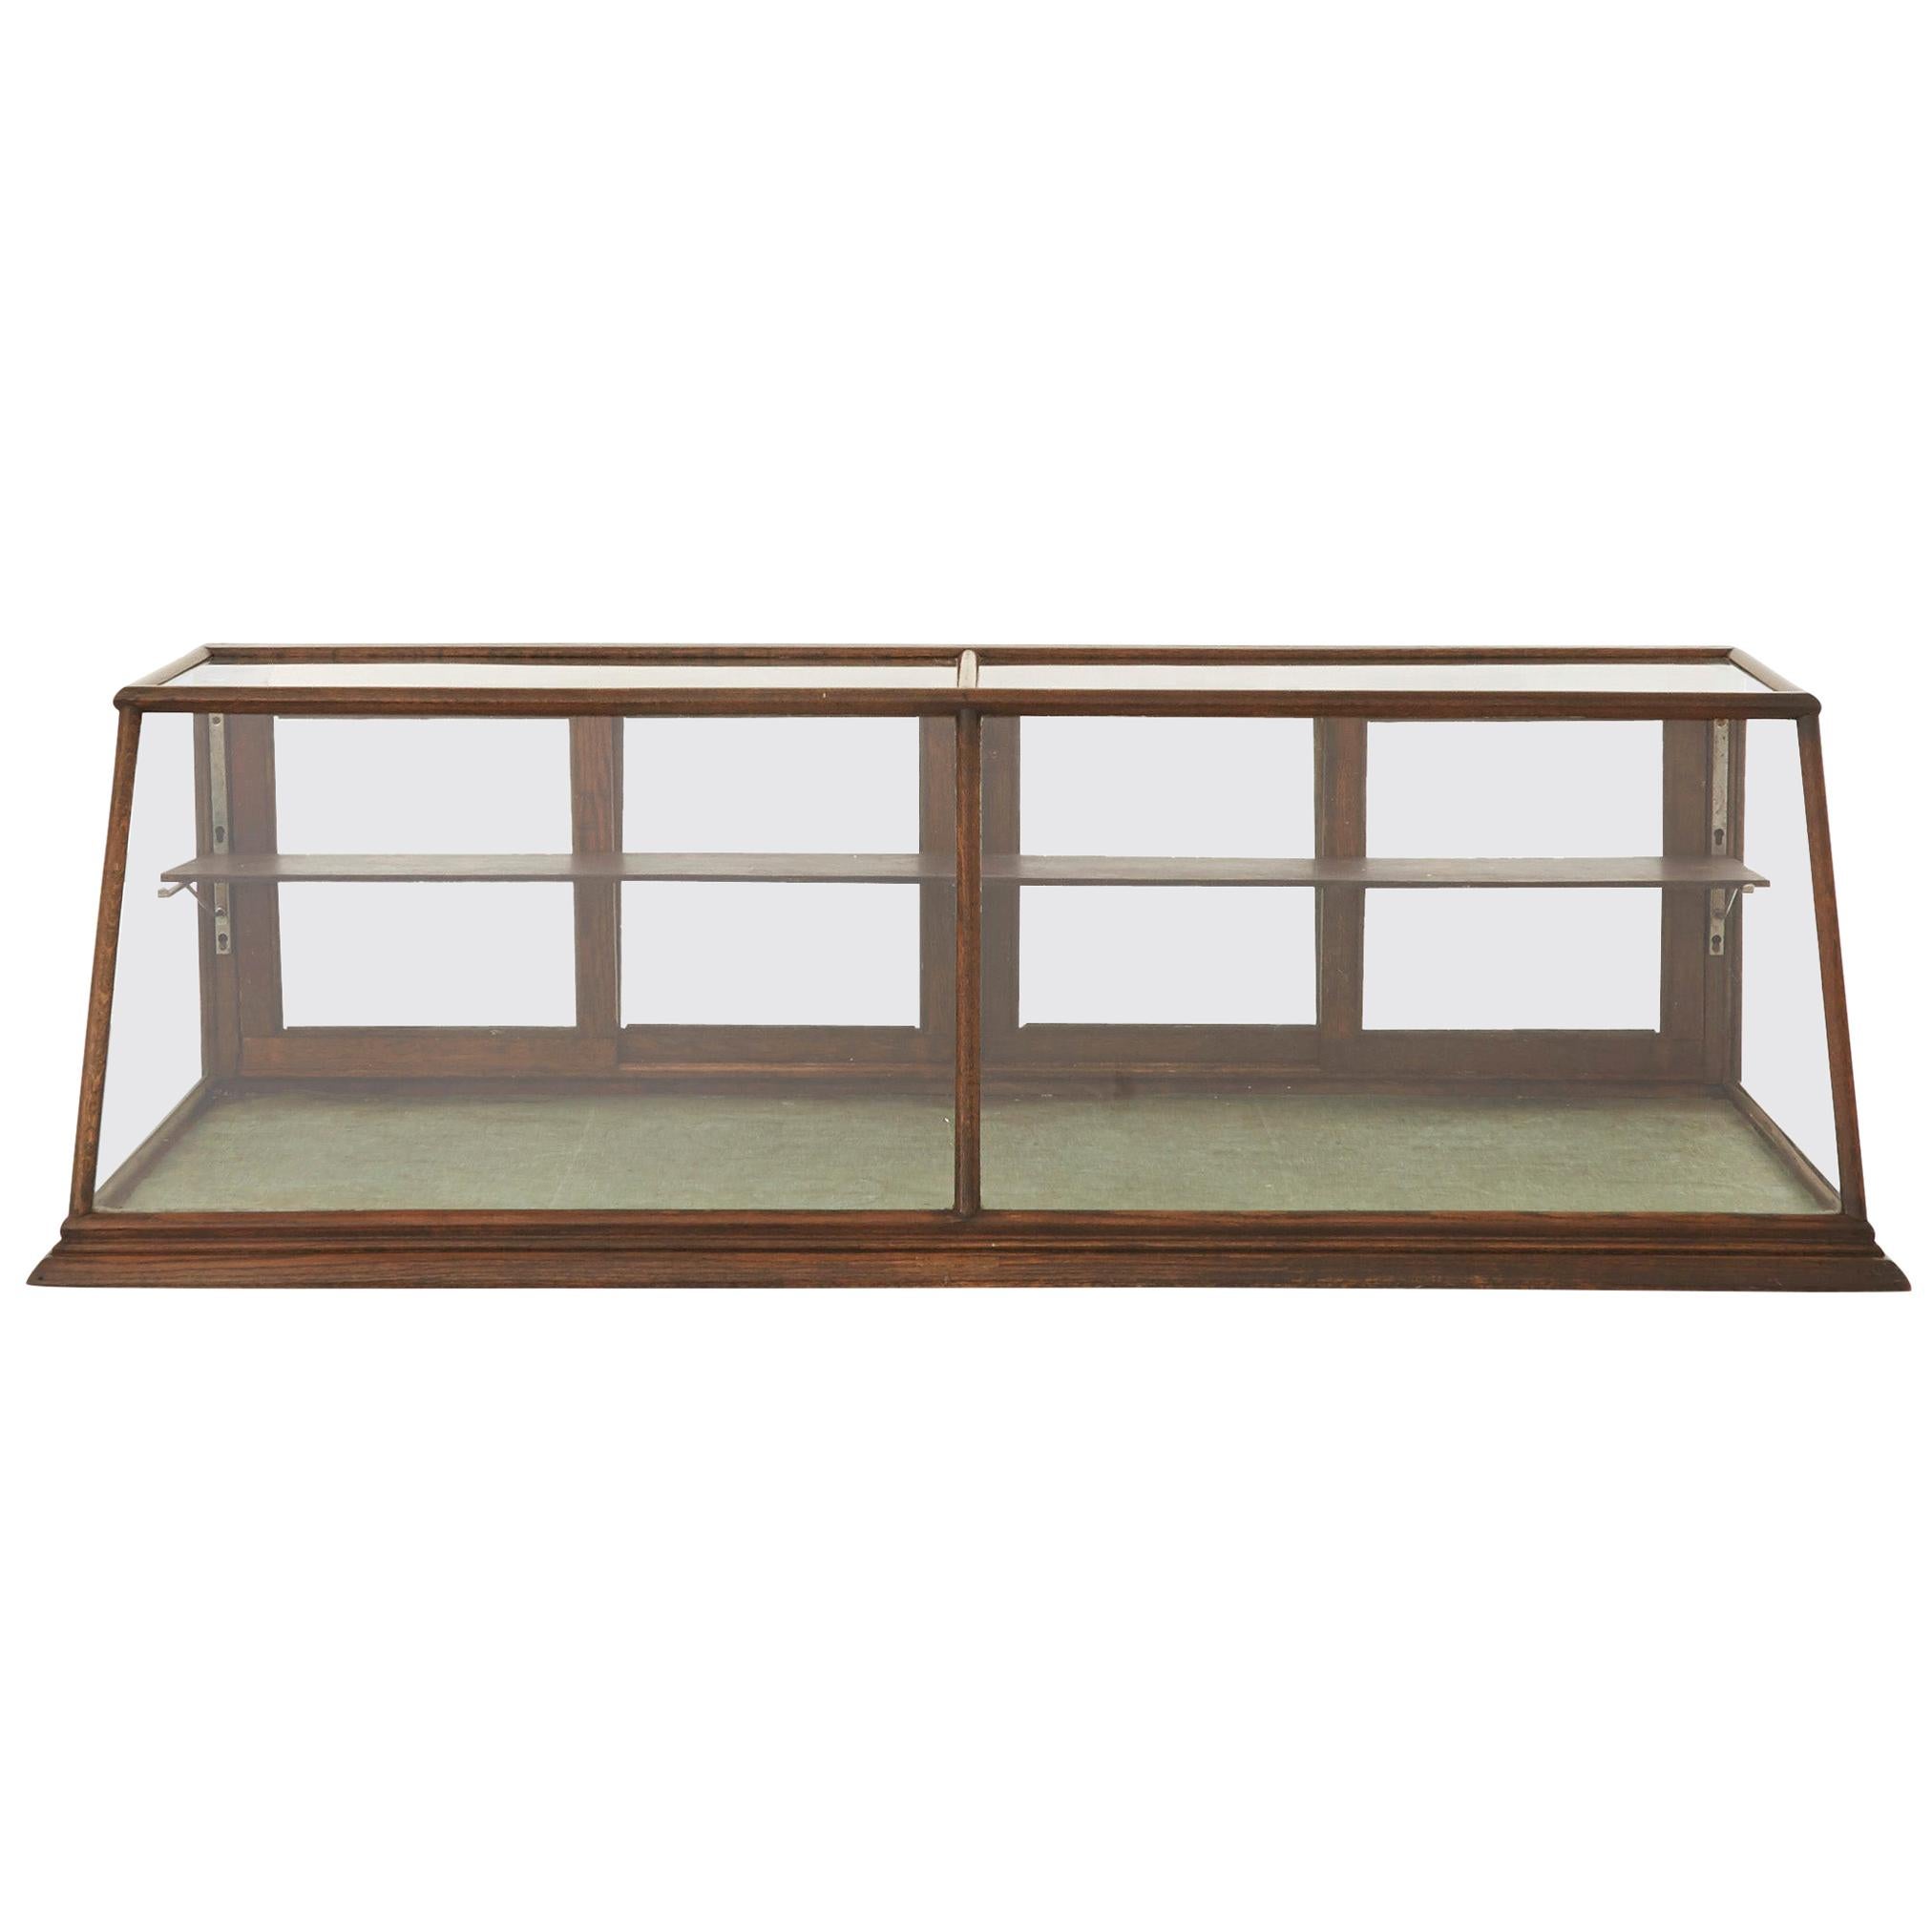 Early 20th Century Glass and Oak Tabletop Display Case For Sale